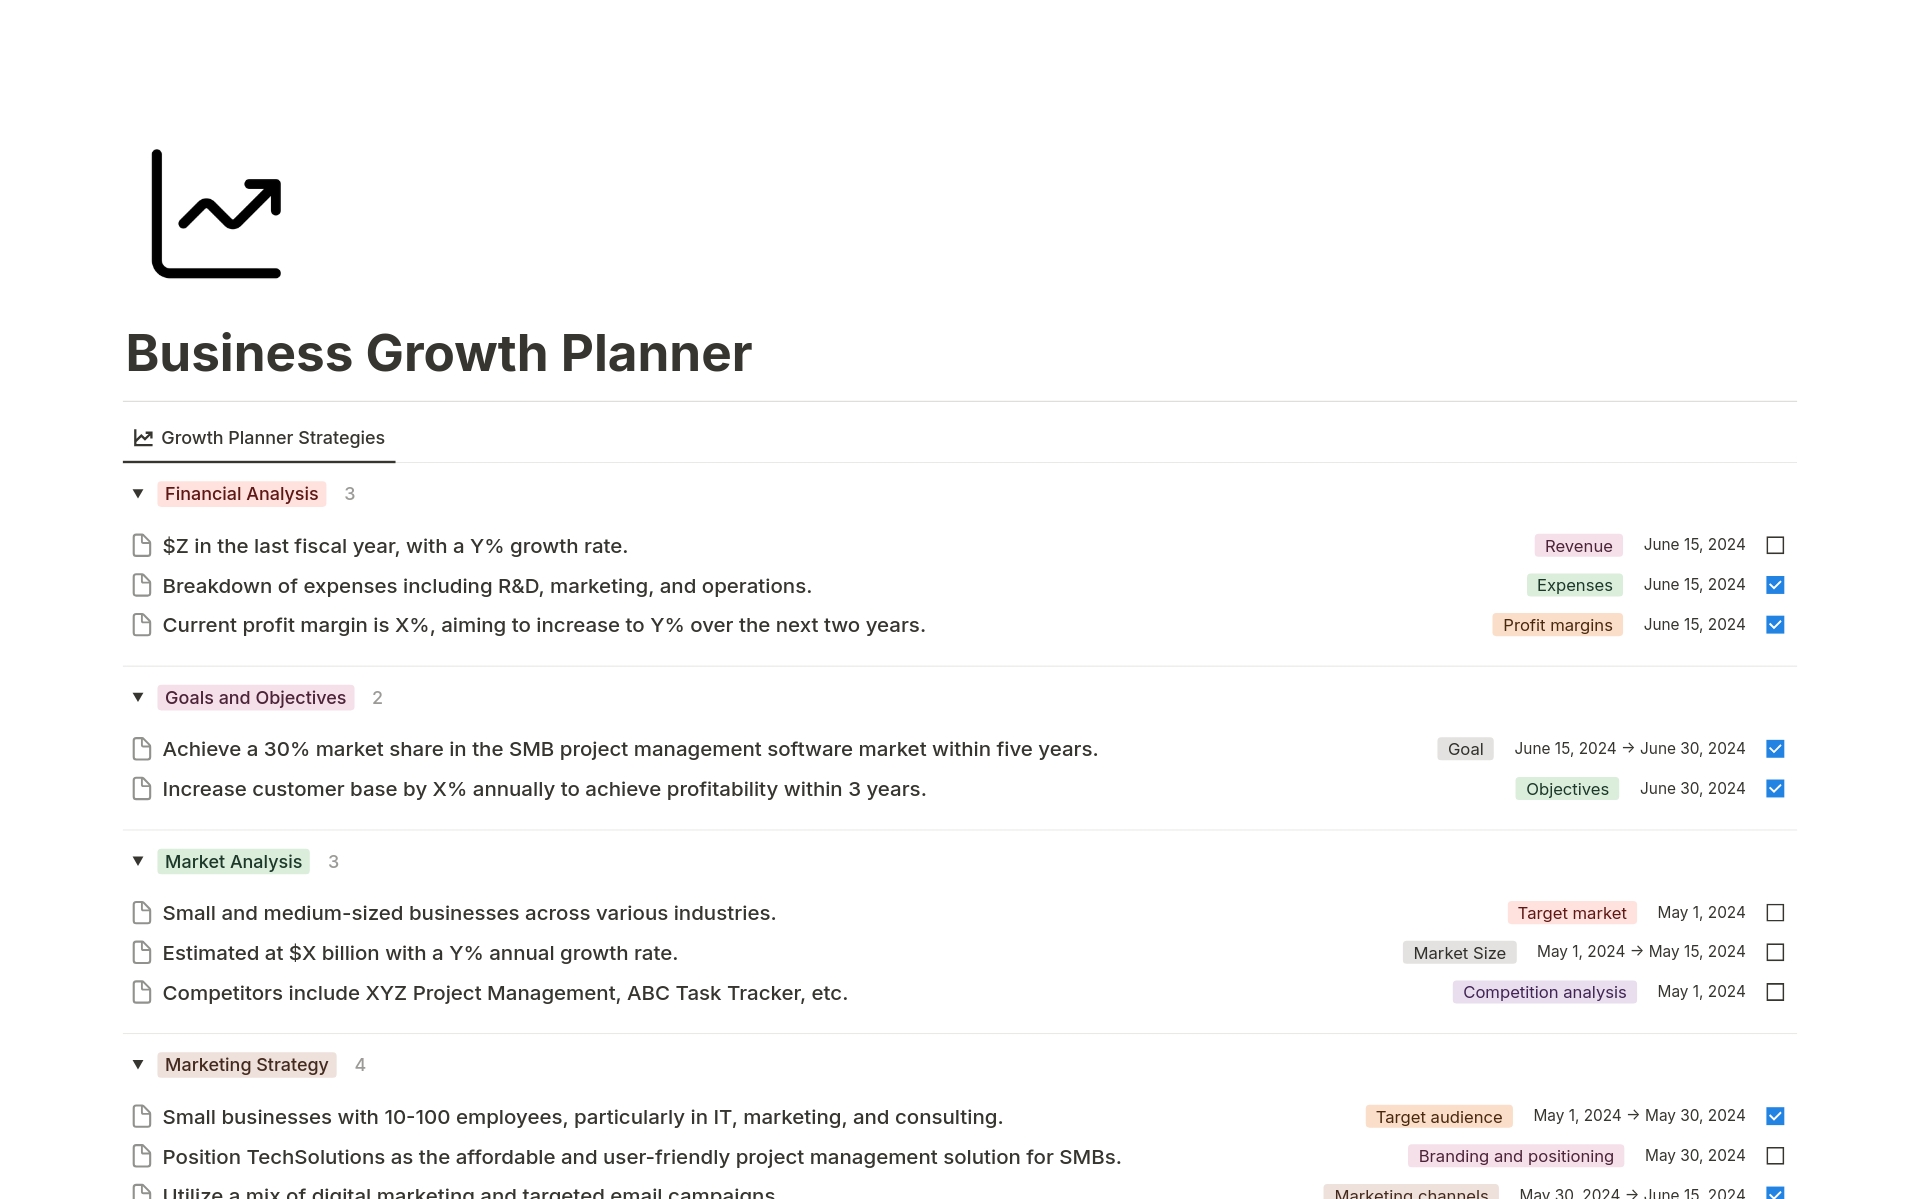 Business Growth Planner is a checklist of items that provides a comprehensive list of tasks essential for setting up a business growth strategy and improving scale of operations in the future.